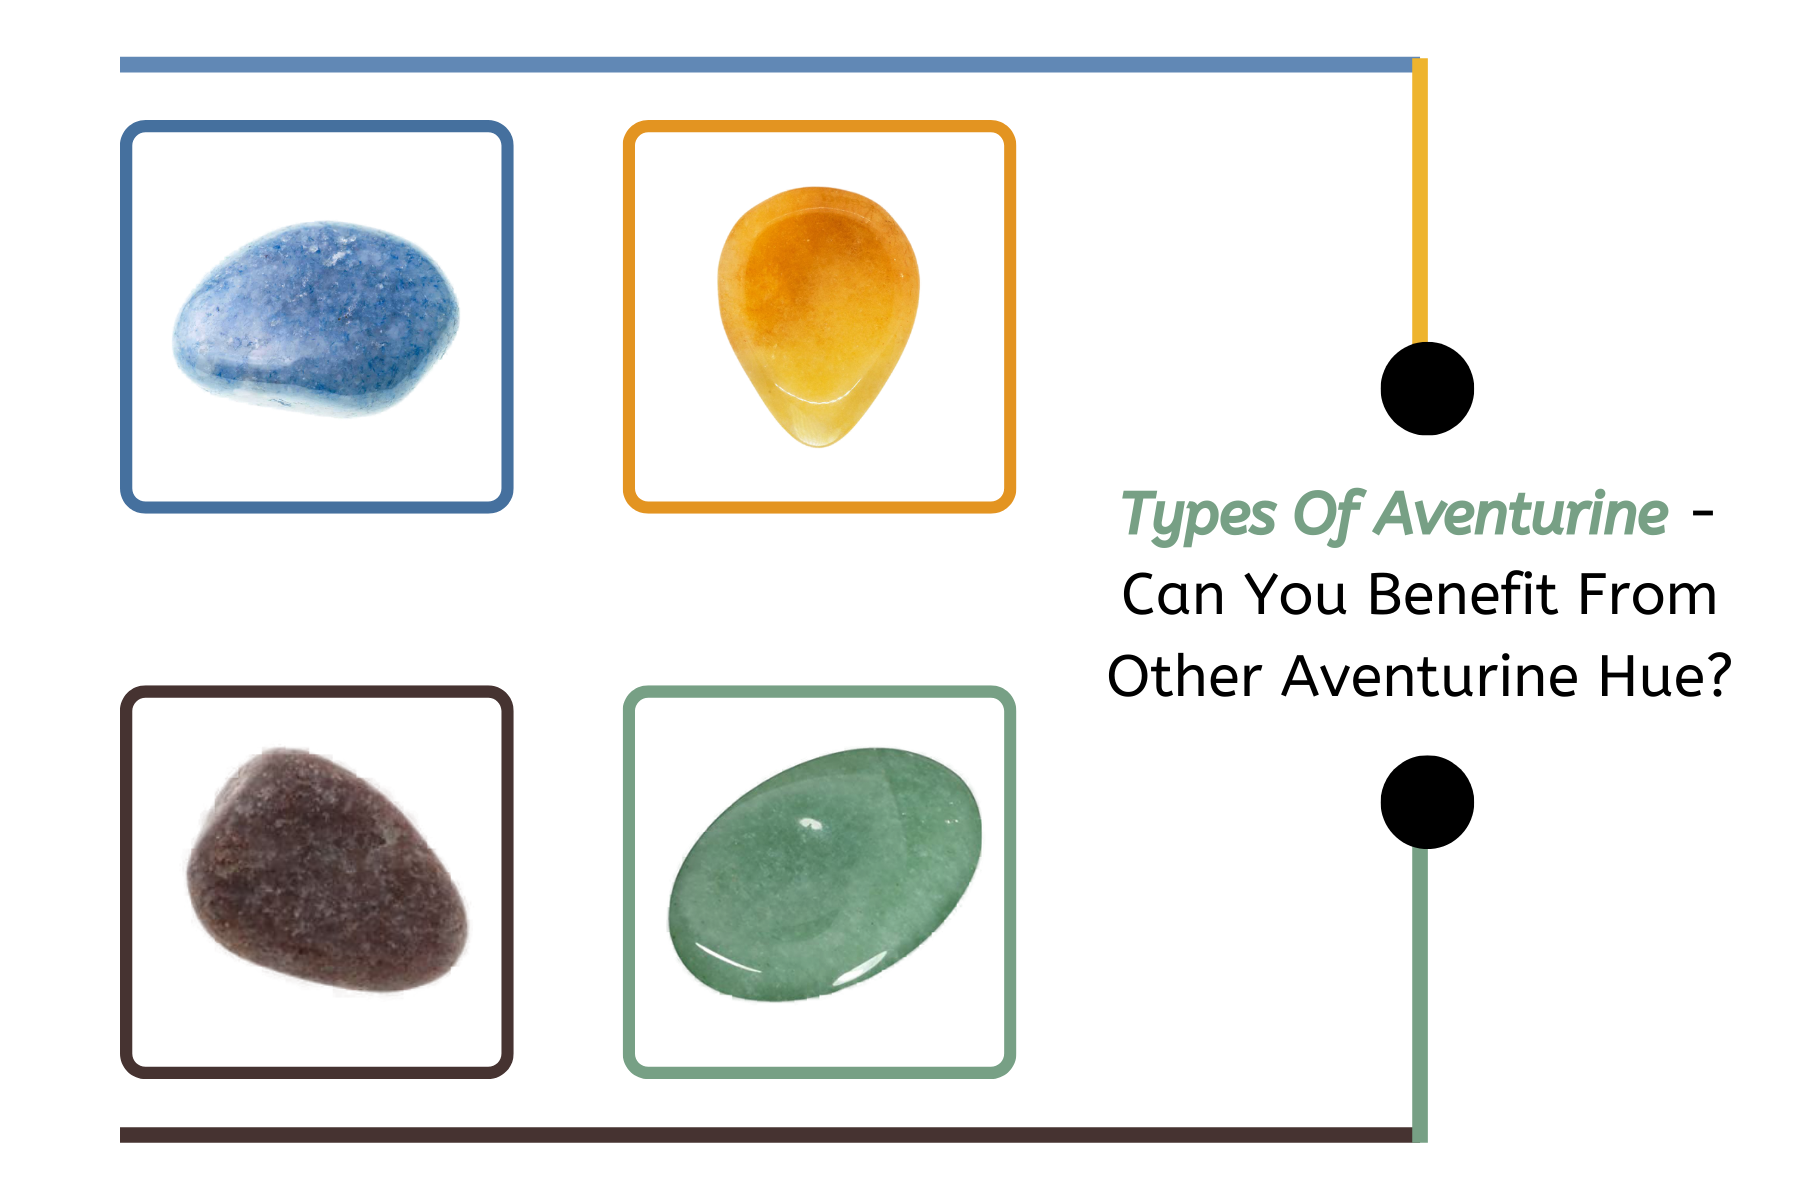 Types Of Aventurine - Can You Benefit From Other Aventurine Hue?